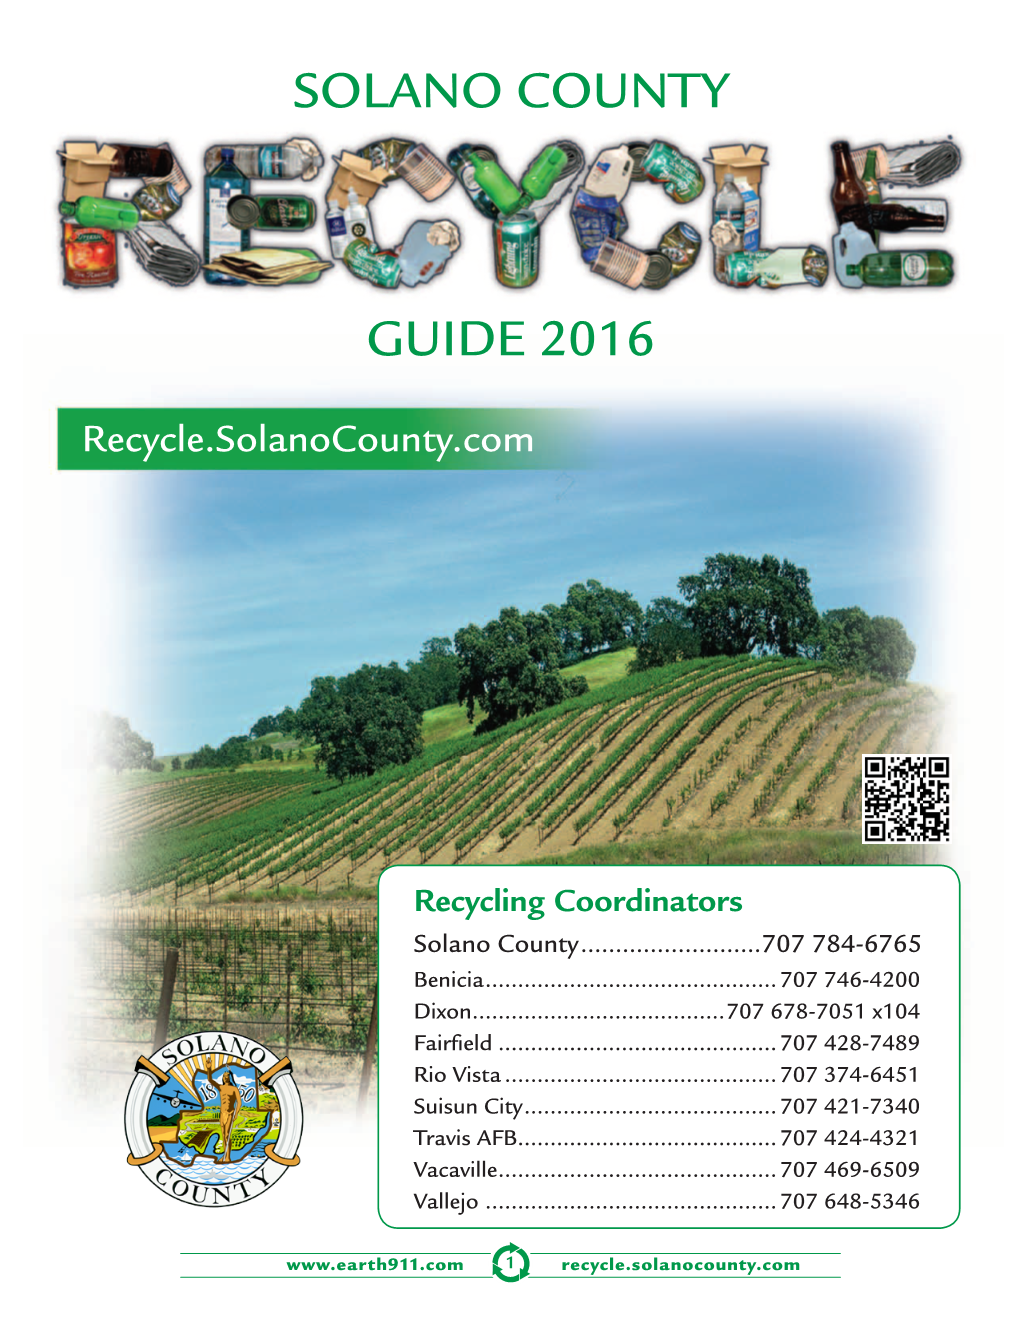 Solano County Recycling Guide in a Continuing Effort to Reduce Waste, Solano County Maintains This Guide for Recycling and Reuse in Solano County